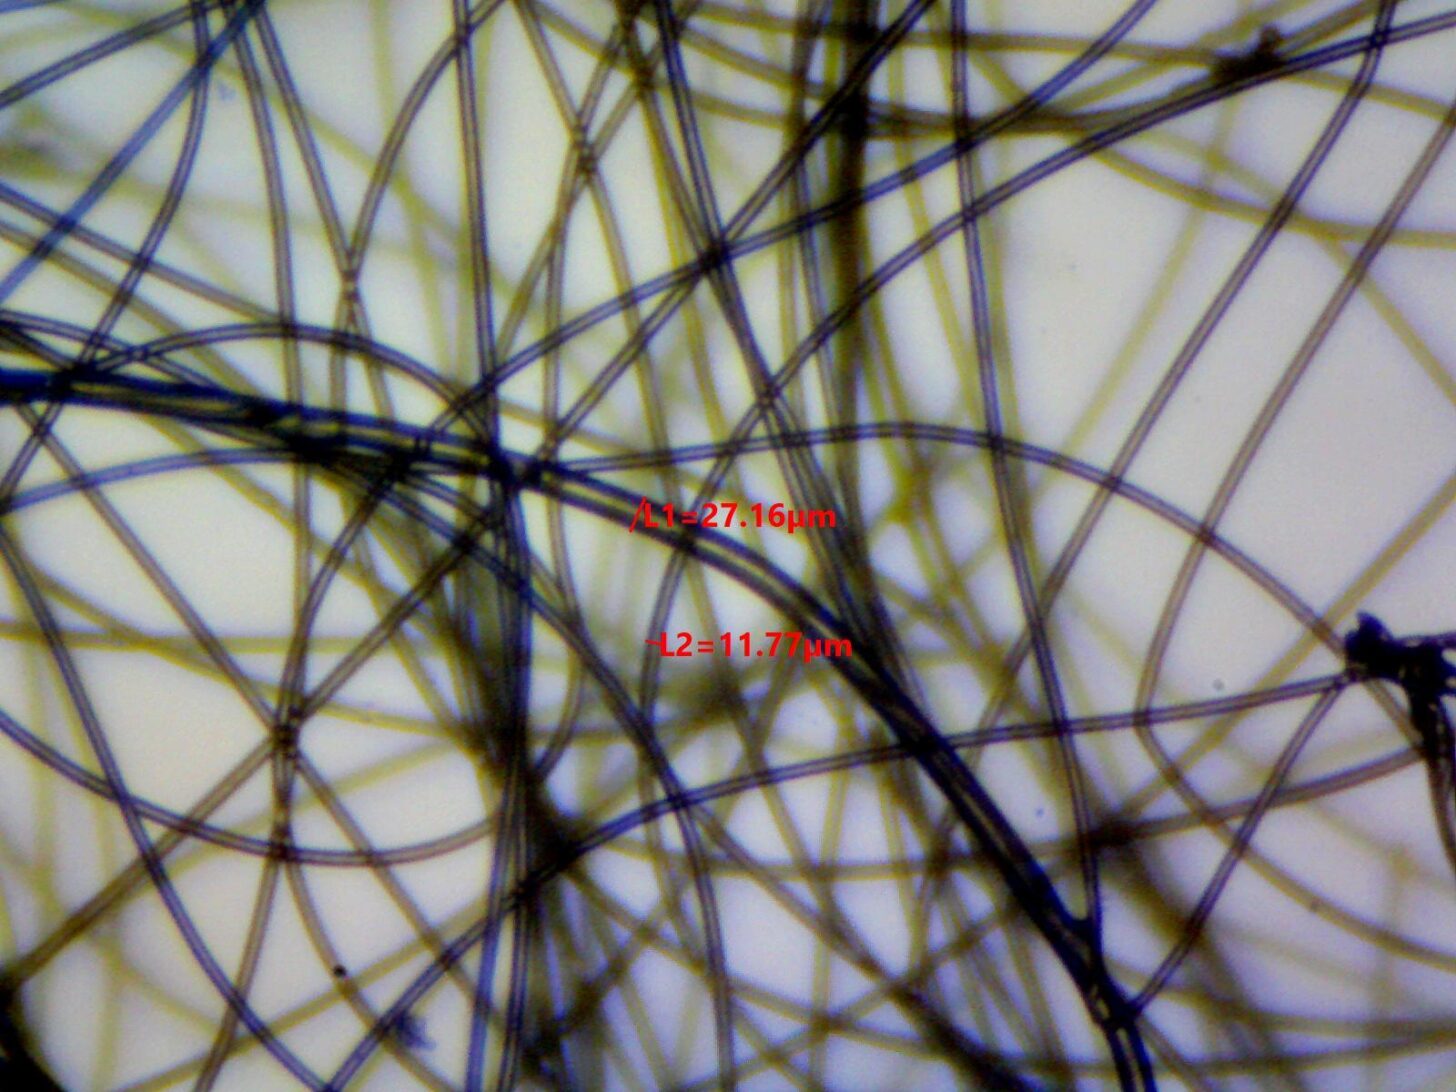 Silicone Bonded Fiberfill photomicrograph showing fiber diameter measurements of 14.00, 26.82, and 43.87 microns.